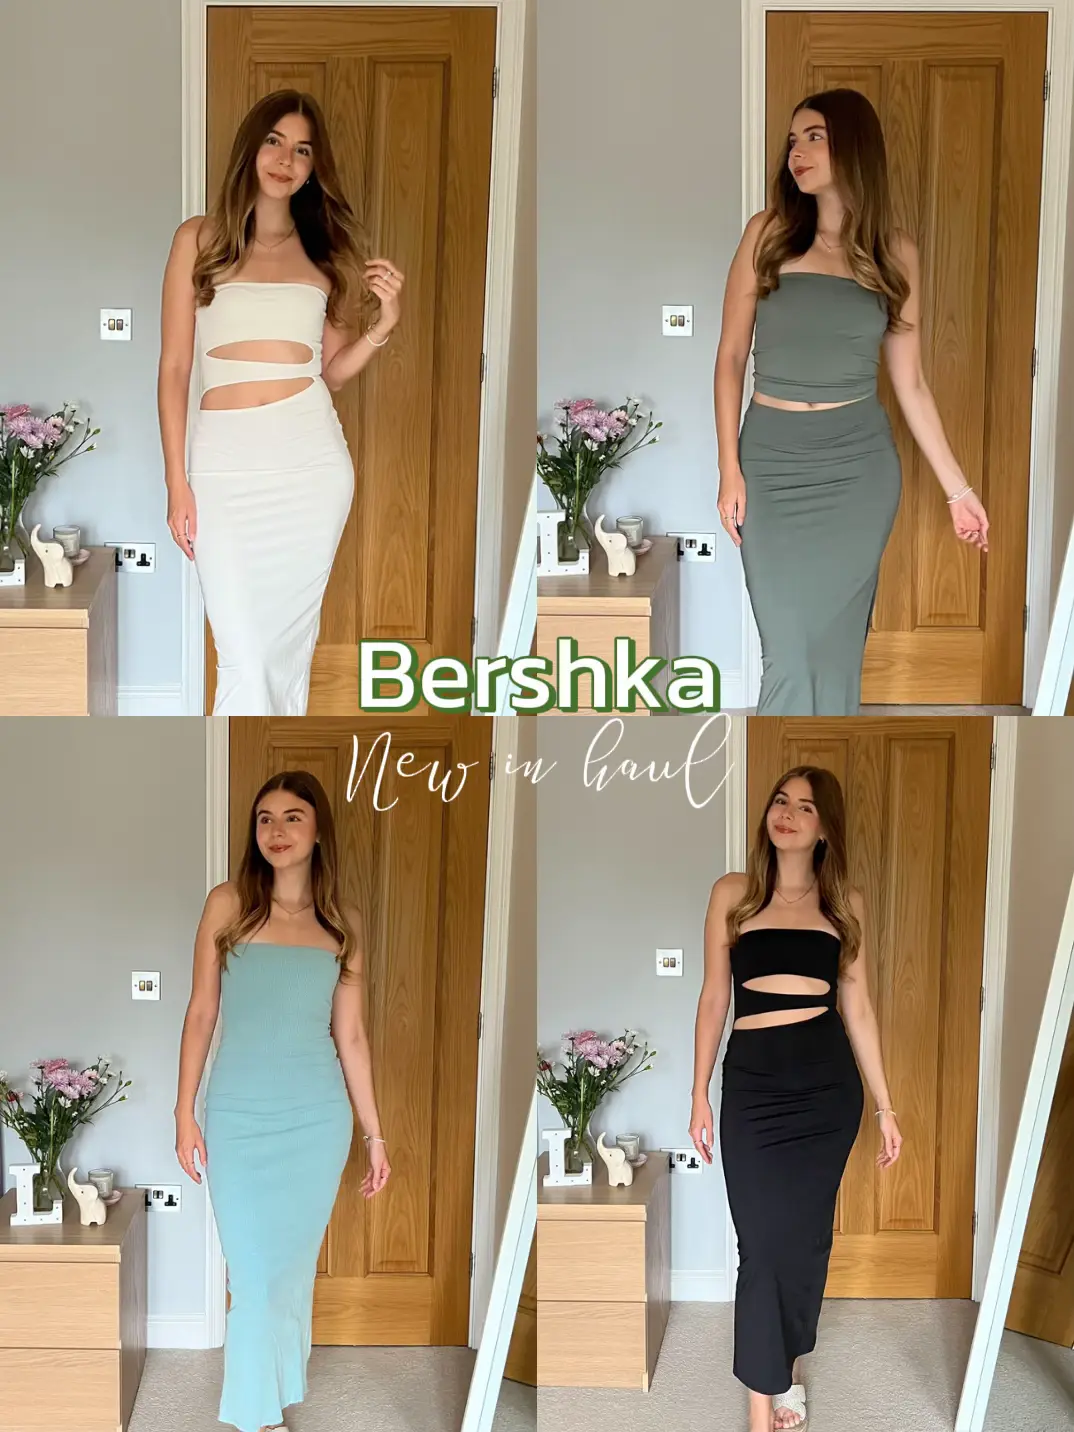 Skims style dress from Bershka, Gallery posted by Nati